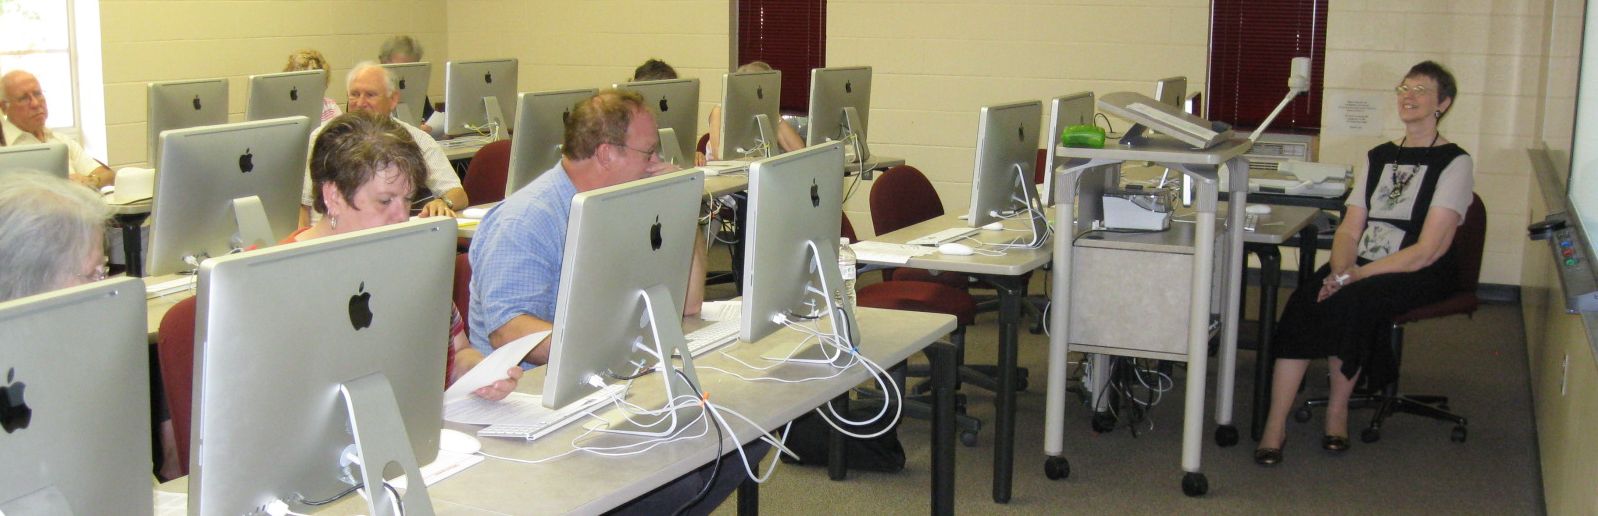 rows of tables with Apple brand desktop computers, attendees of online workshop, overhead projector and white board at front of classroom